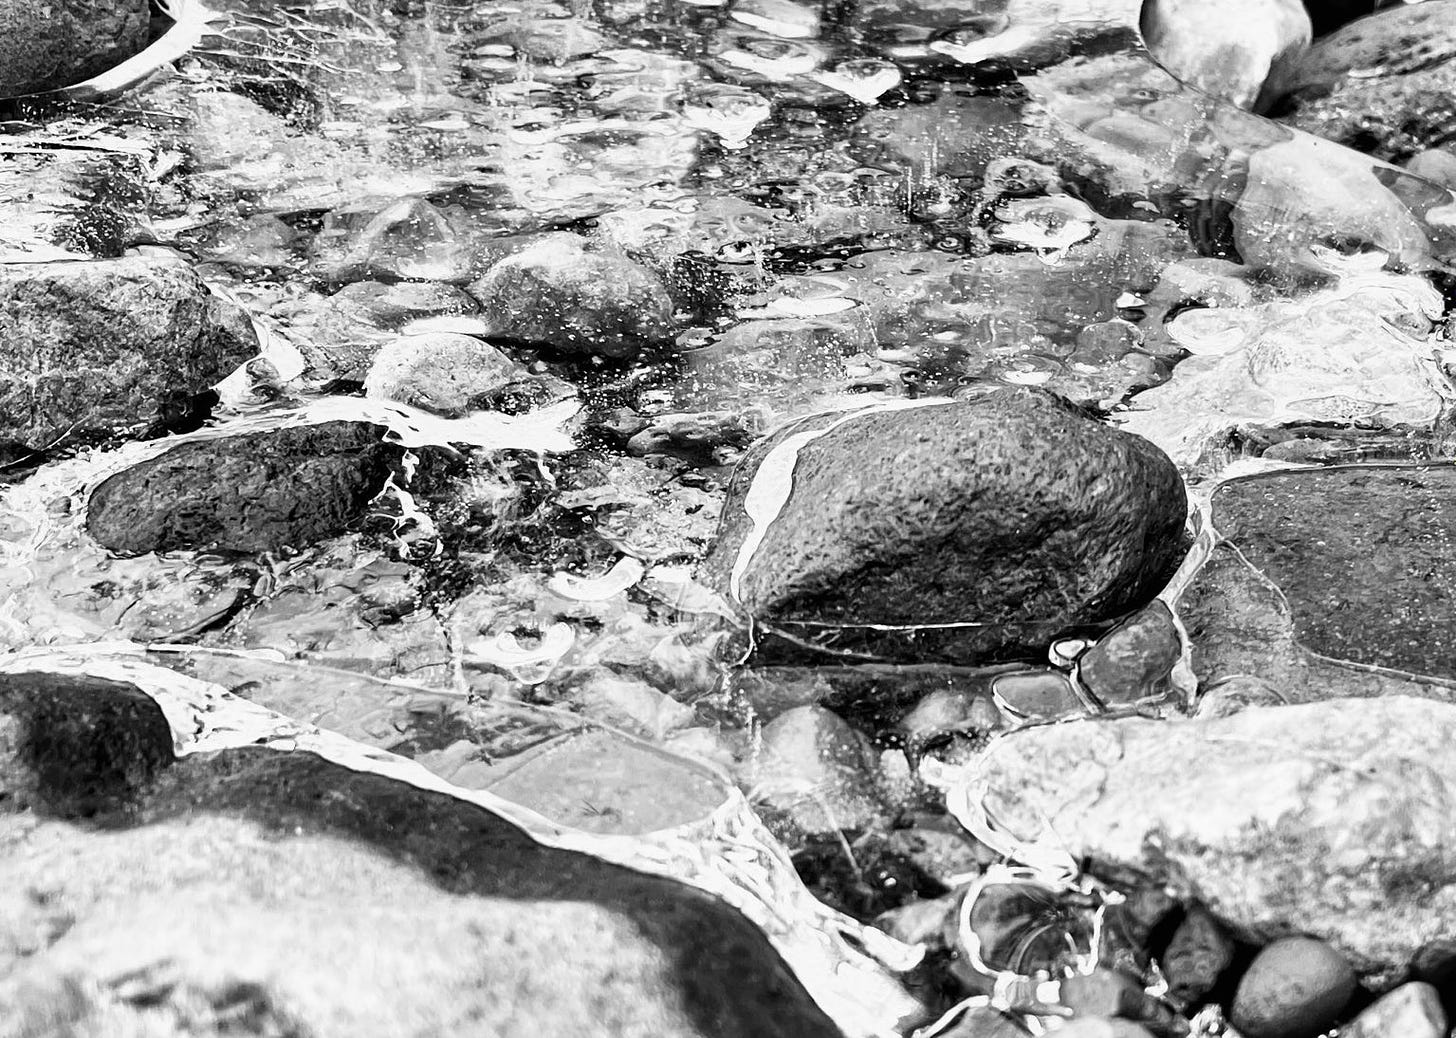 A black and white photo of a frozen stream bed. Several of the larger rocks are partially submerged in the ice. The ice is mostly clear with some cracks and bubbles visible throughout.